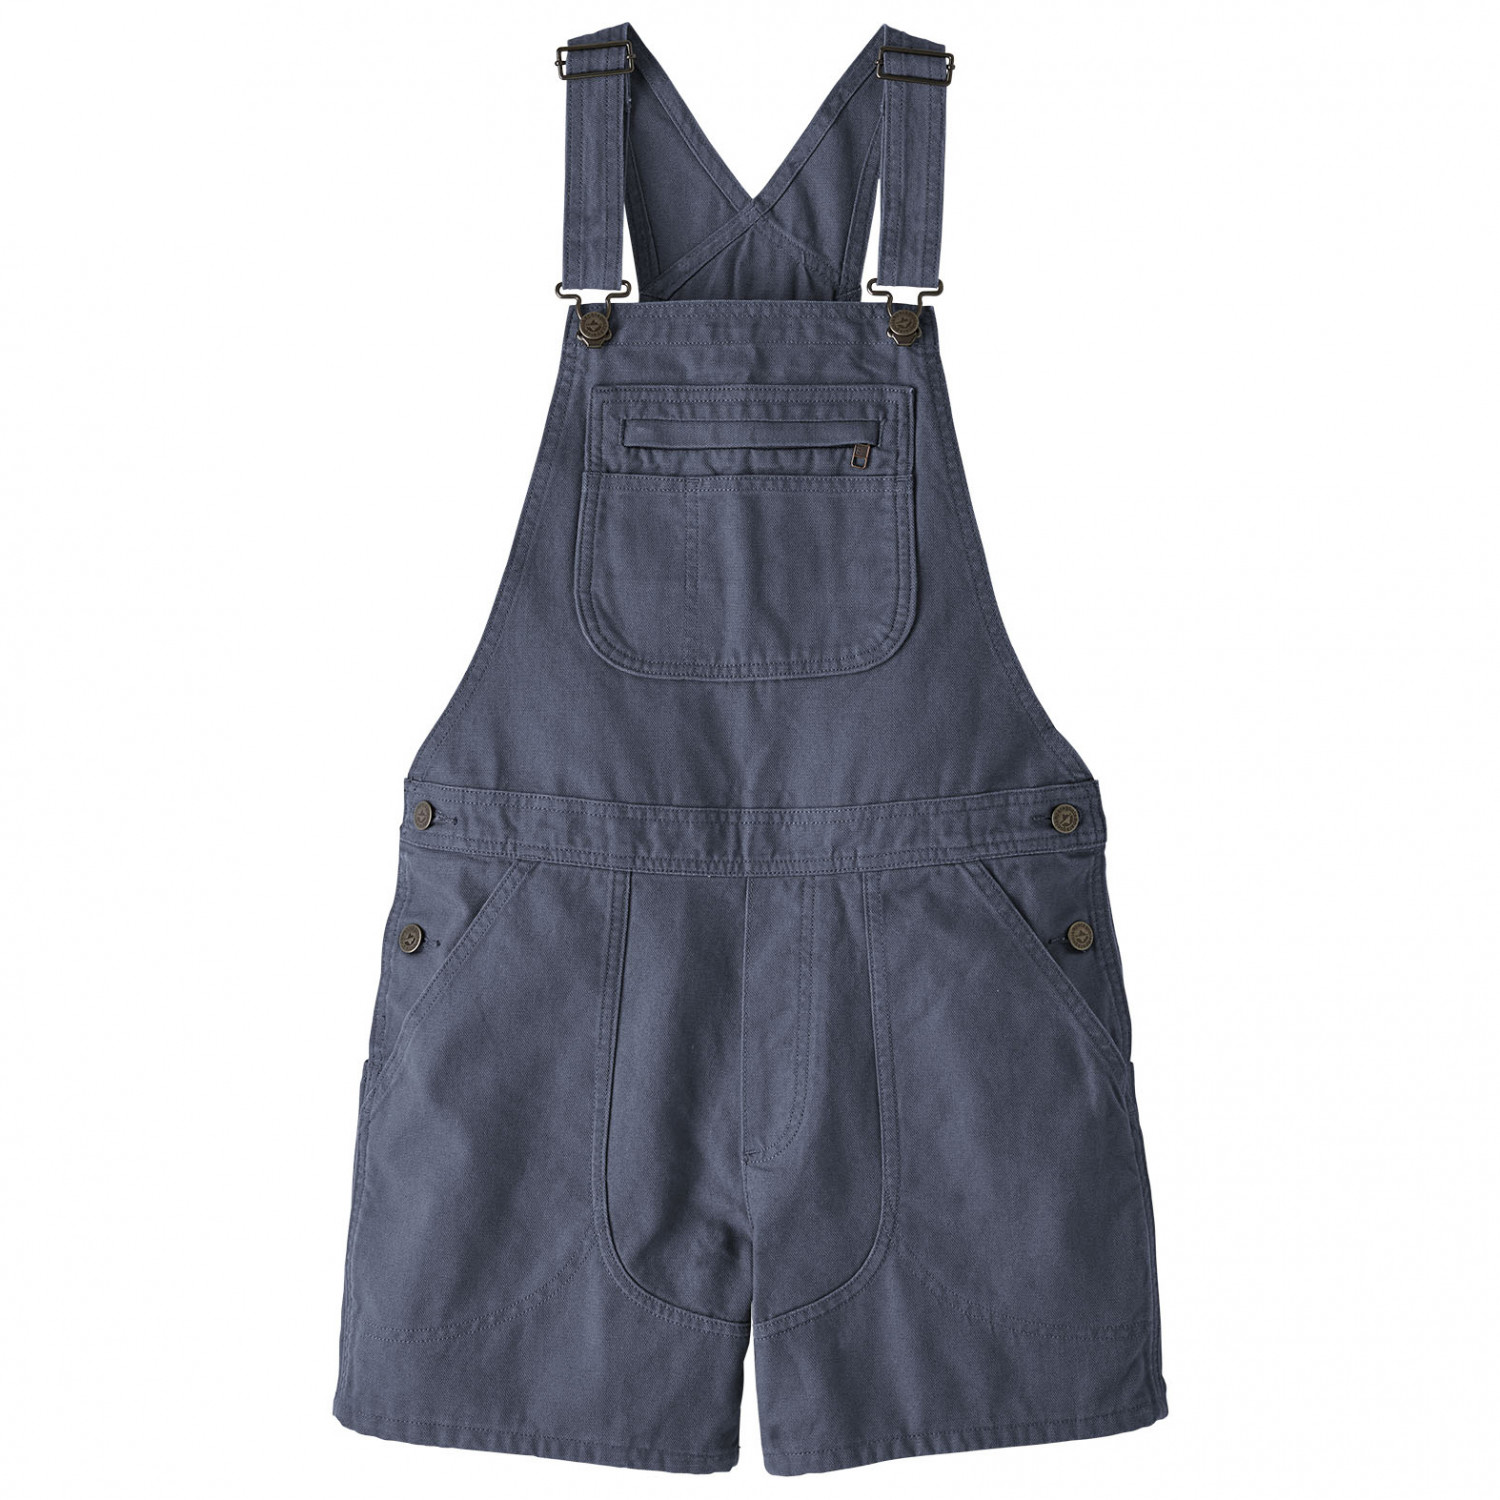 Шорты Patagonia Women's Stand Up Overalls, цвет Smolder Blue шорты patagonia patagonia stand up 7 in